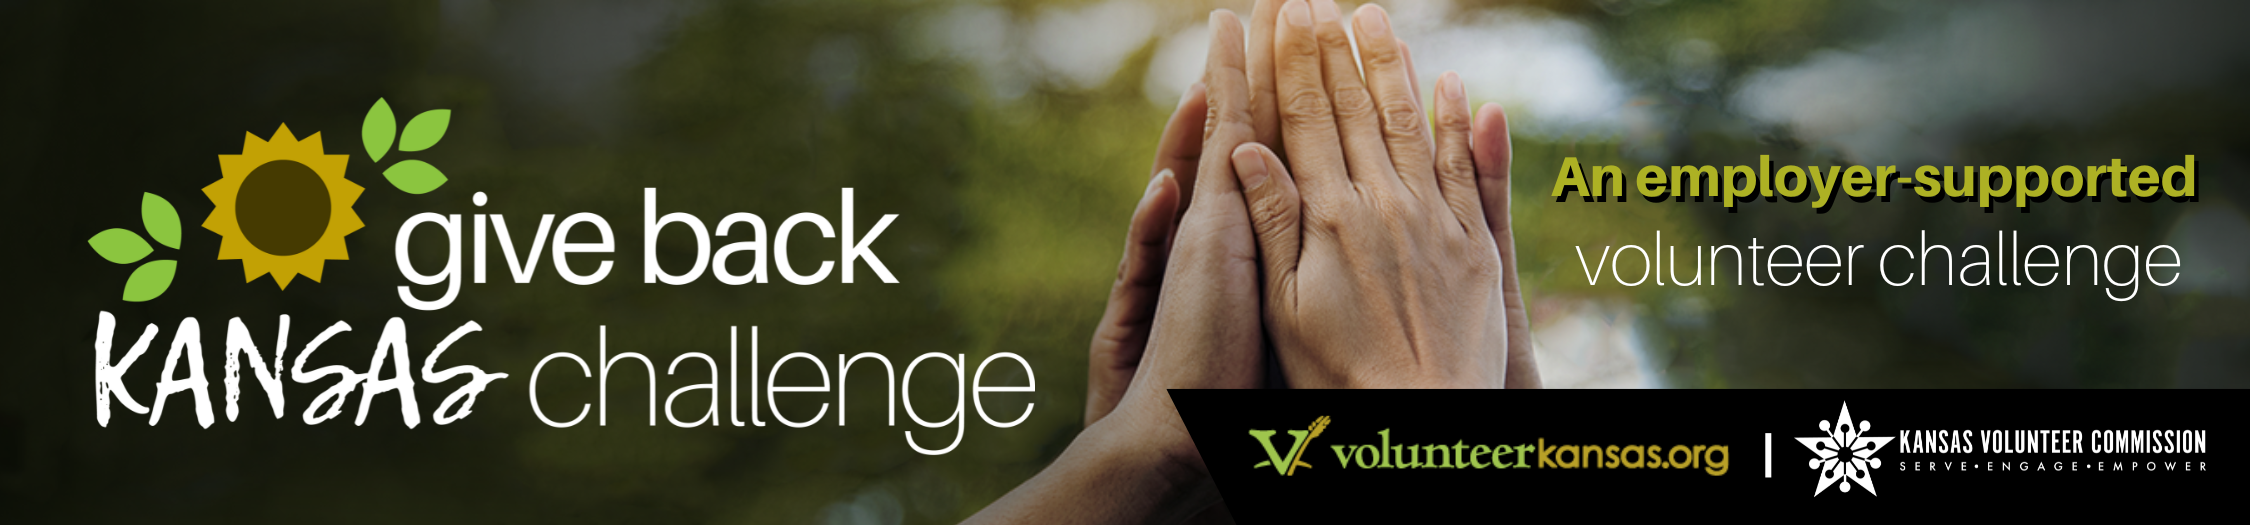 Give Back Kansas Challenge - An employer-supported volunteer challenge 